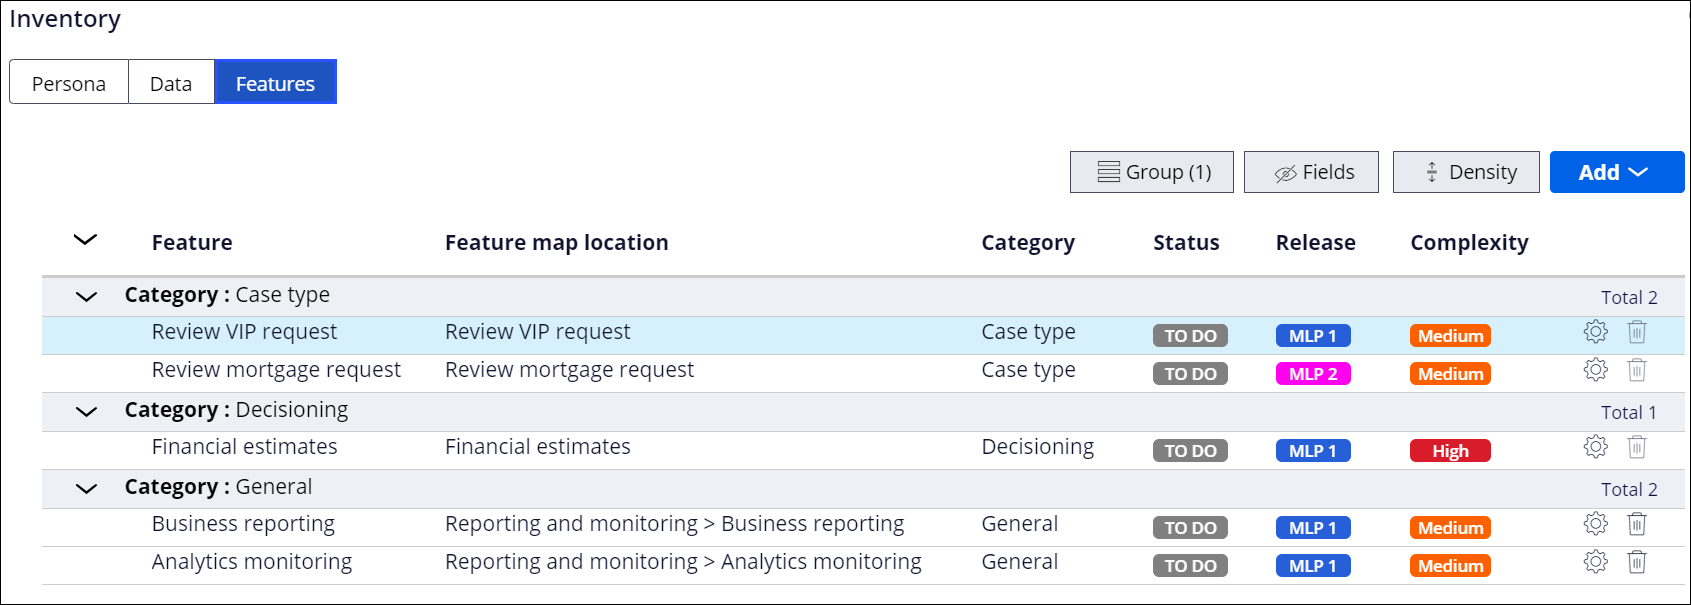 Application inventory with features grouped by category.